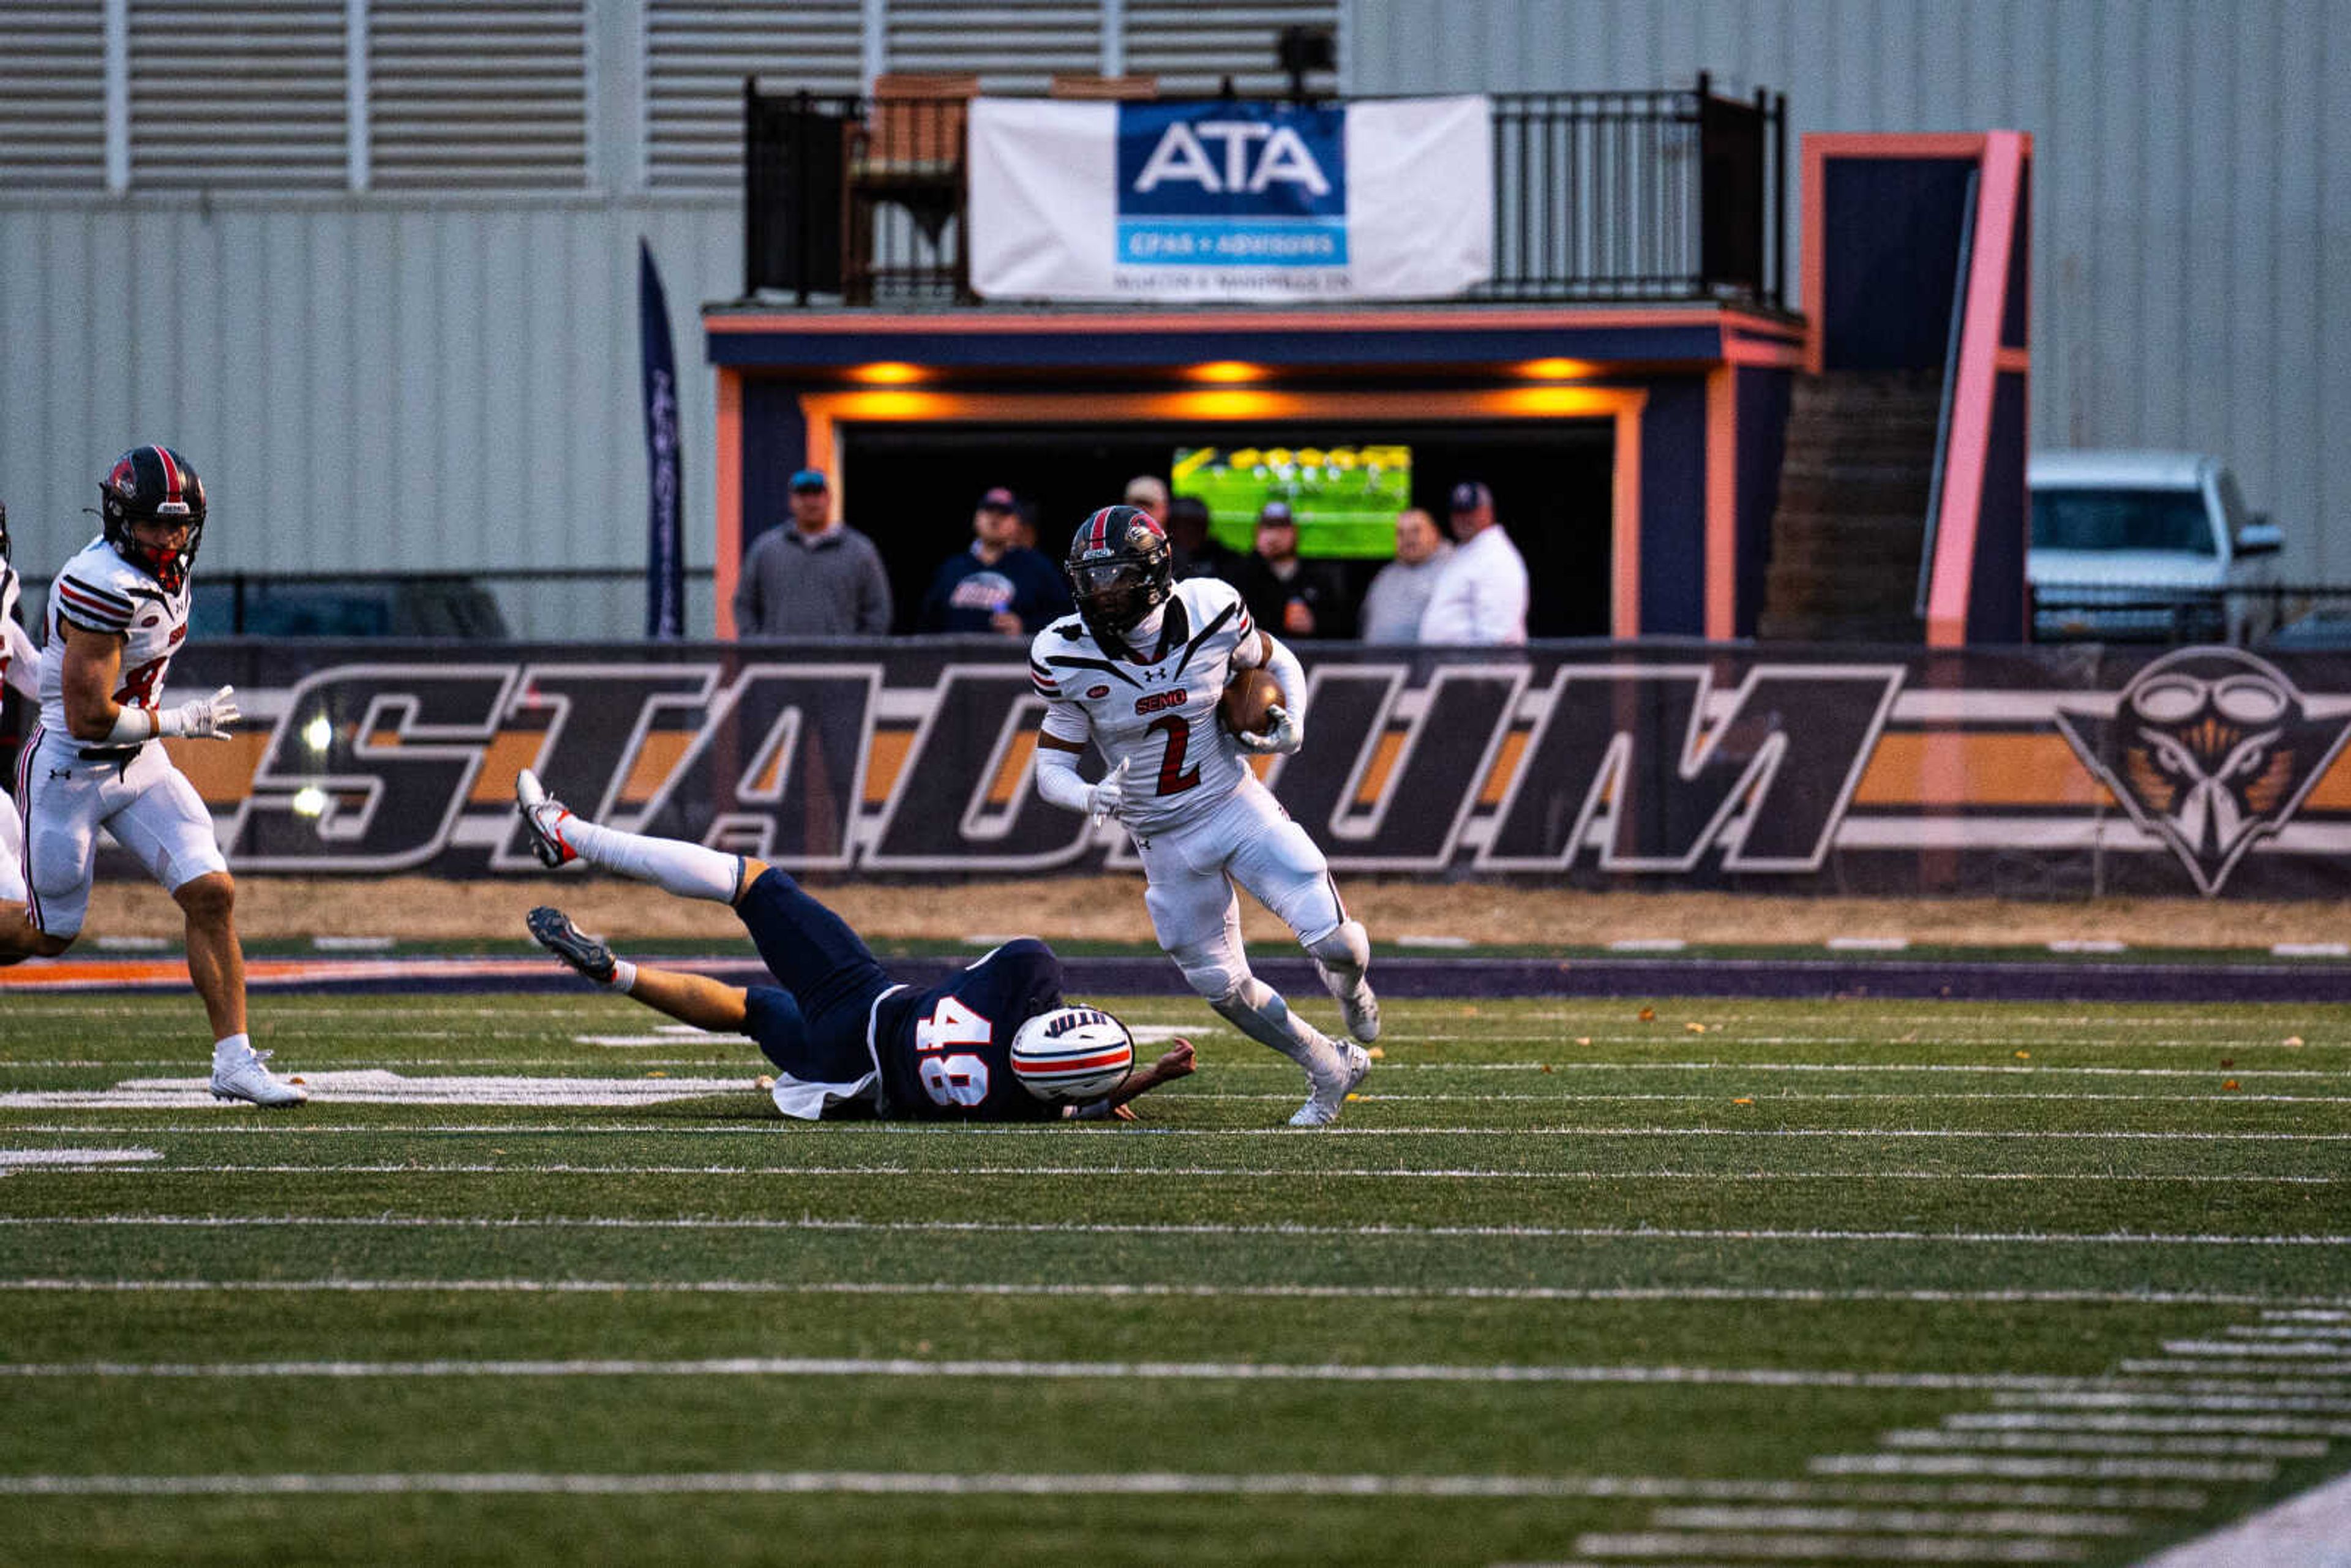 SEMO junior defensive back Joedrick Lewis (2) runs with the ball during SEMO's 41-14 loss at UT-Martin on Nov. 11. Lewis would get a pick-six on SEMO's opening defensive drive.